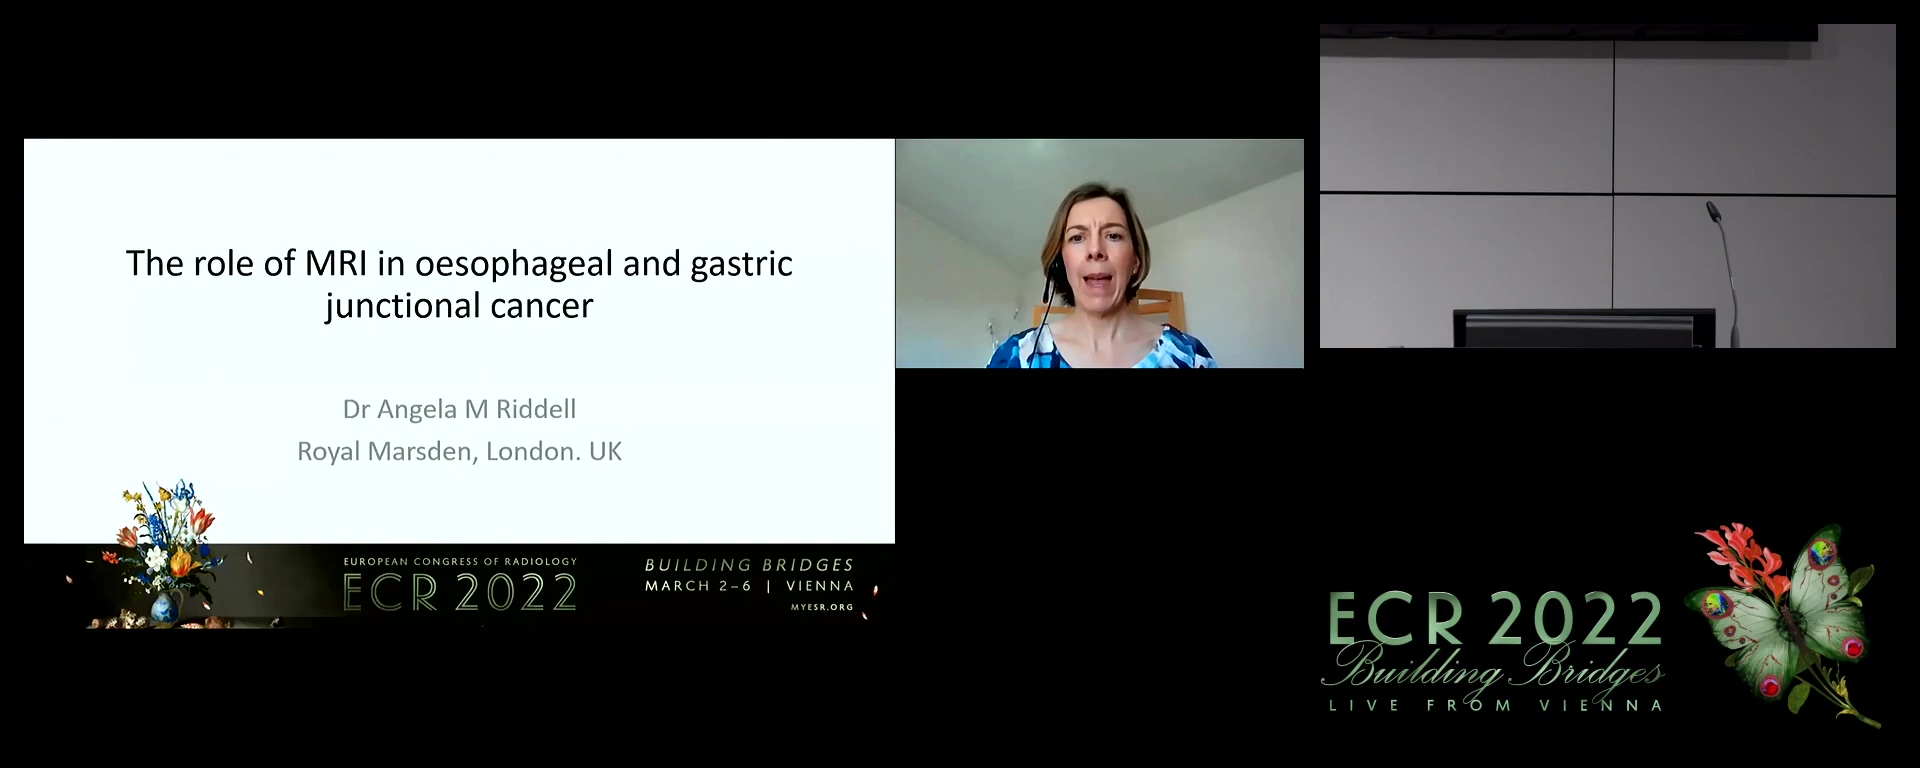 The role of MRI in oesophageal and gastric junctional cancer - Angela M. Riddell, London / UK